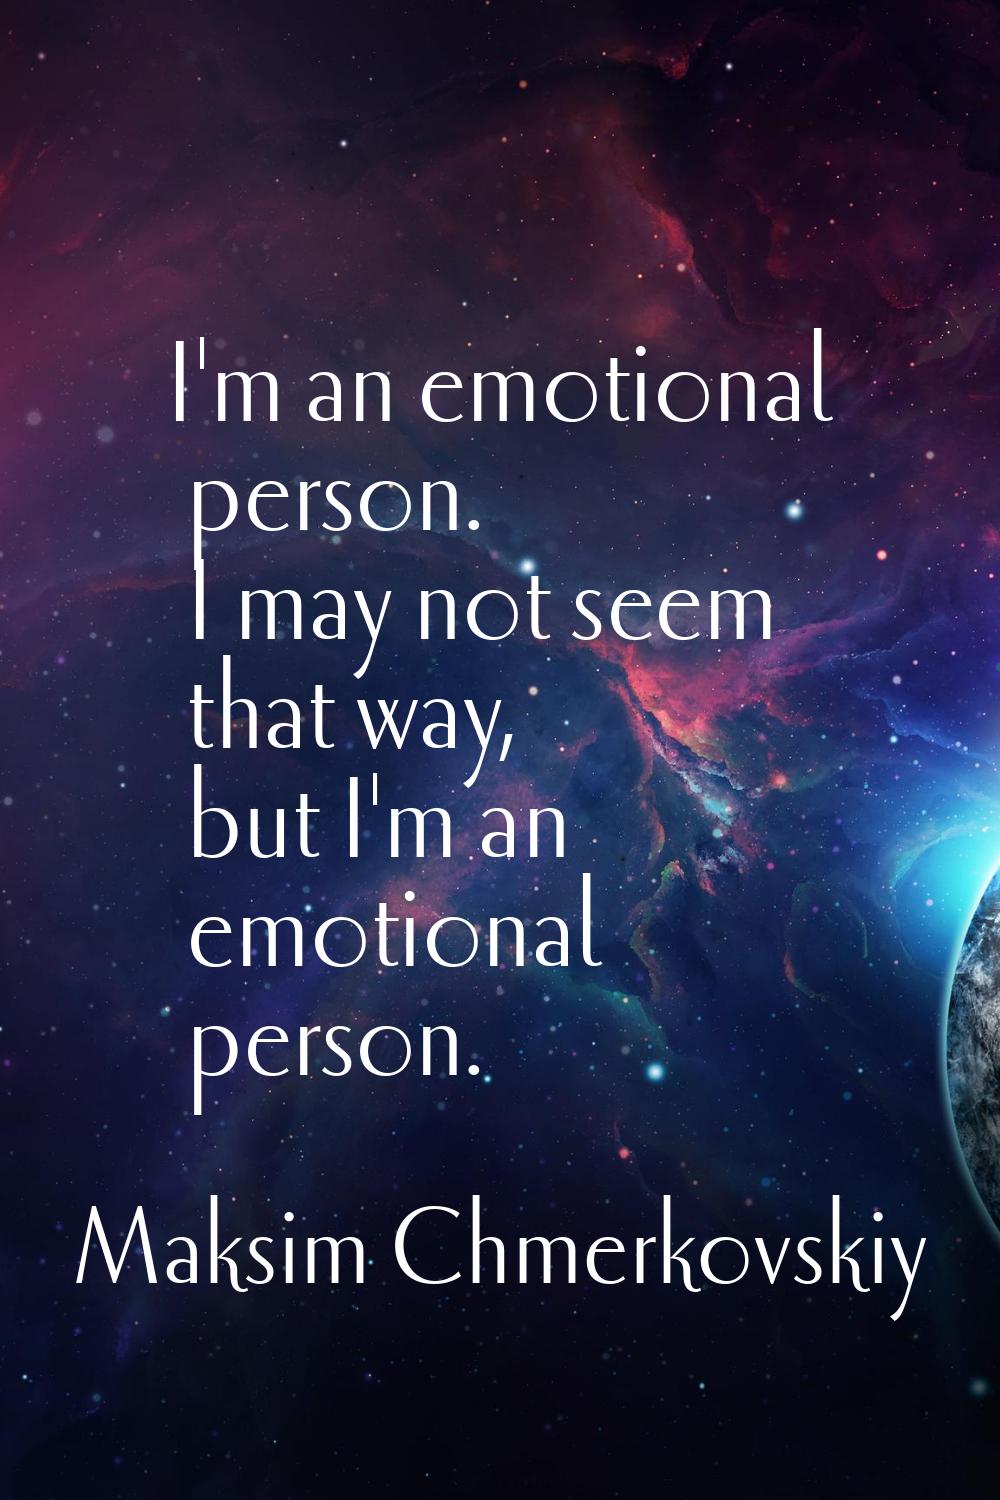 I'm an emotional person. I may not seem that way, but I'm an emotional person.